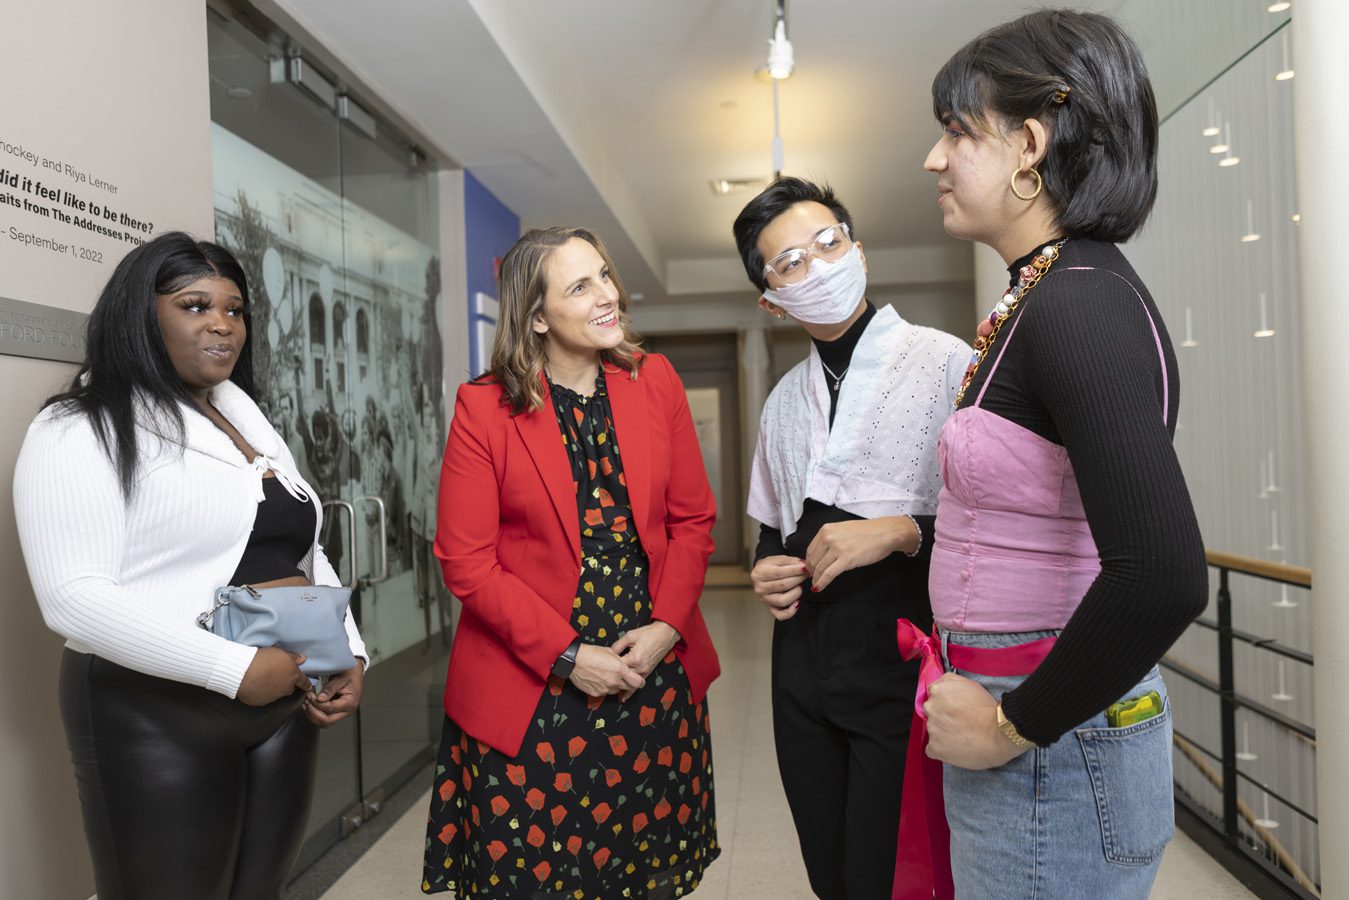 Three people standing and listening to a fourth person on the right speak in the hallway at The Center with archival photography of a protest hanging behind them.